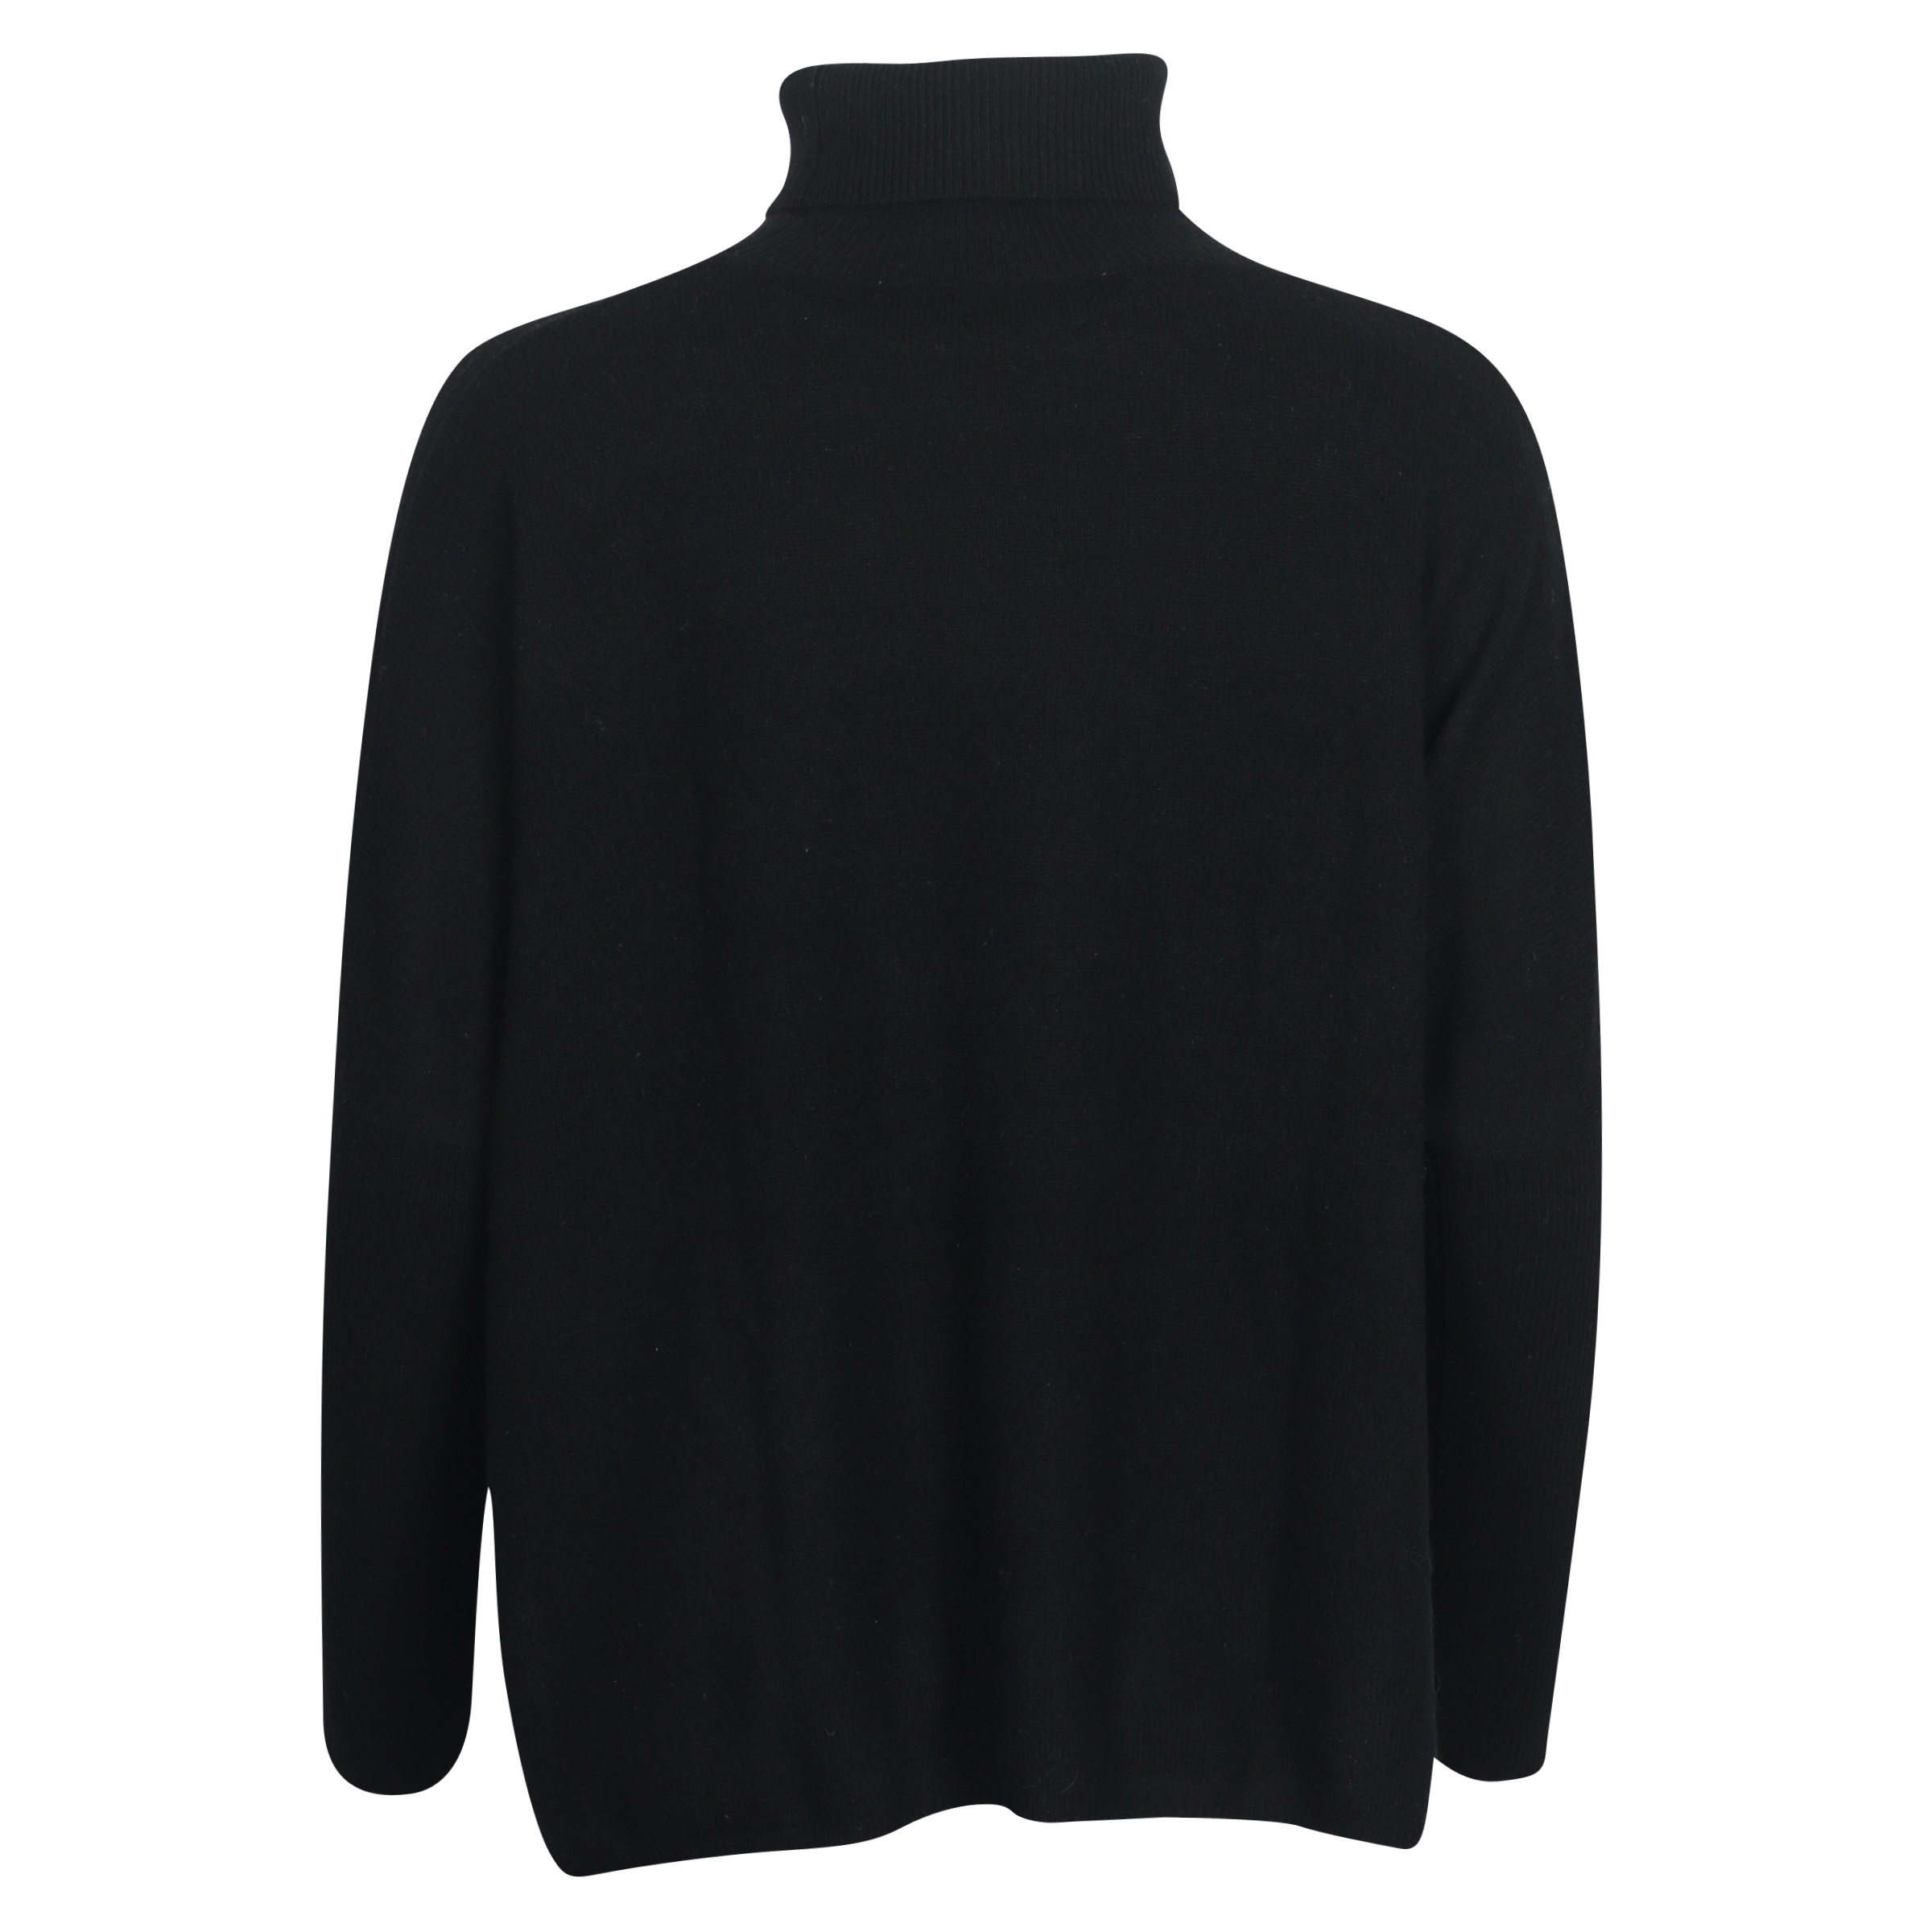 Absolut Cashmere Oversized Turtle Neck Sweater Clara in Black S